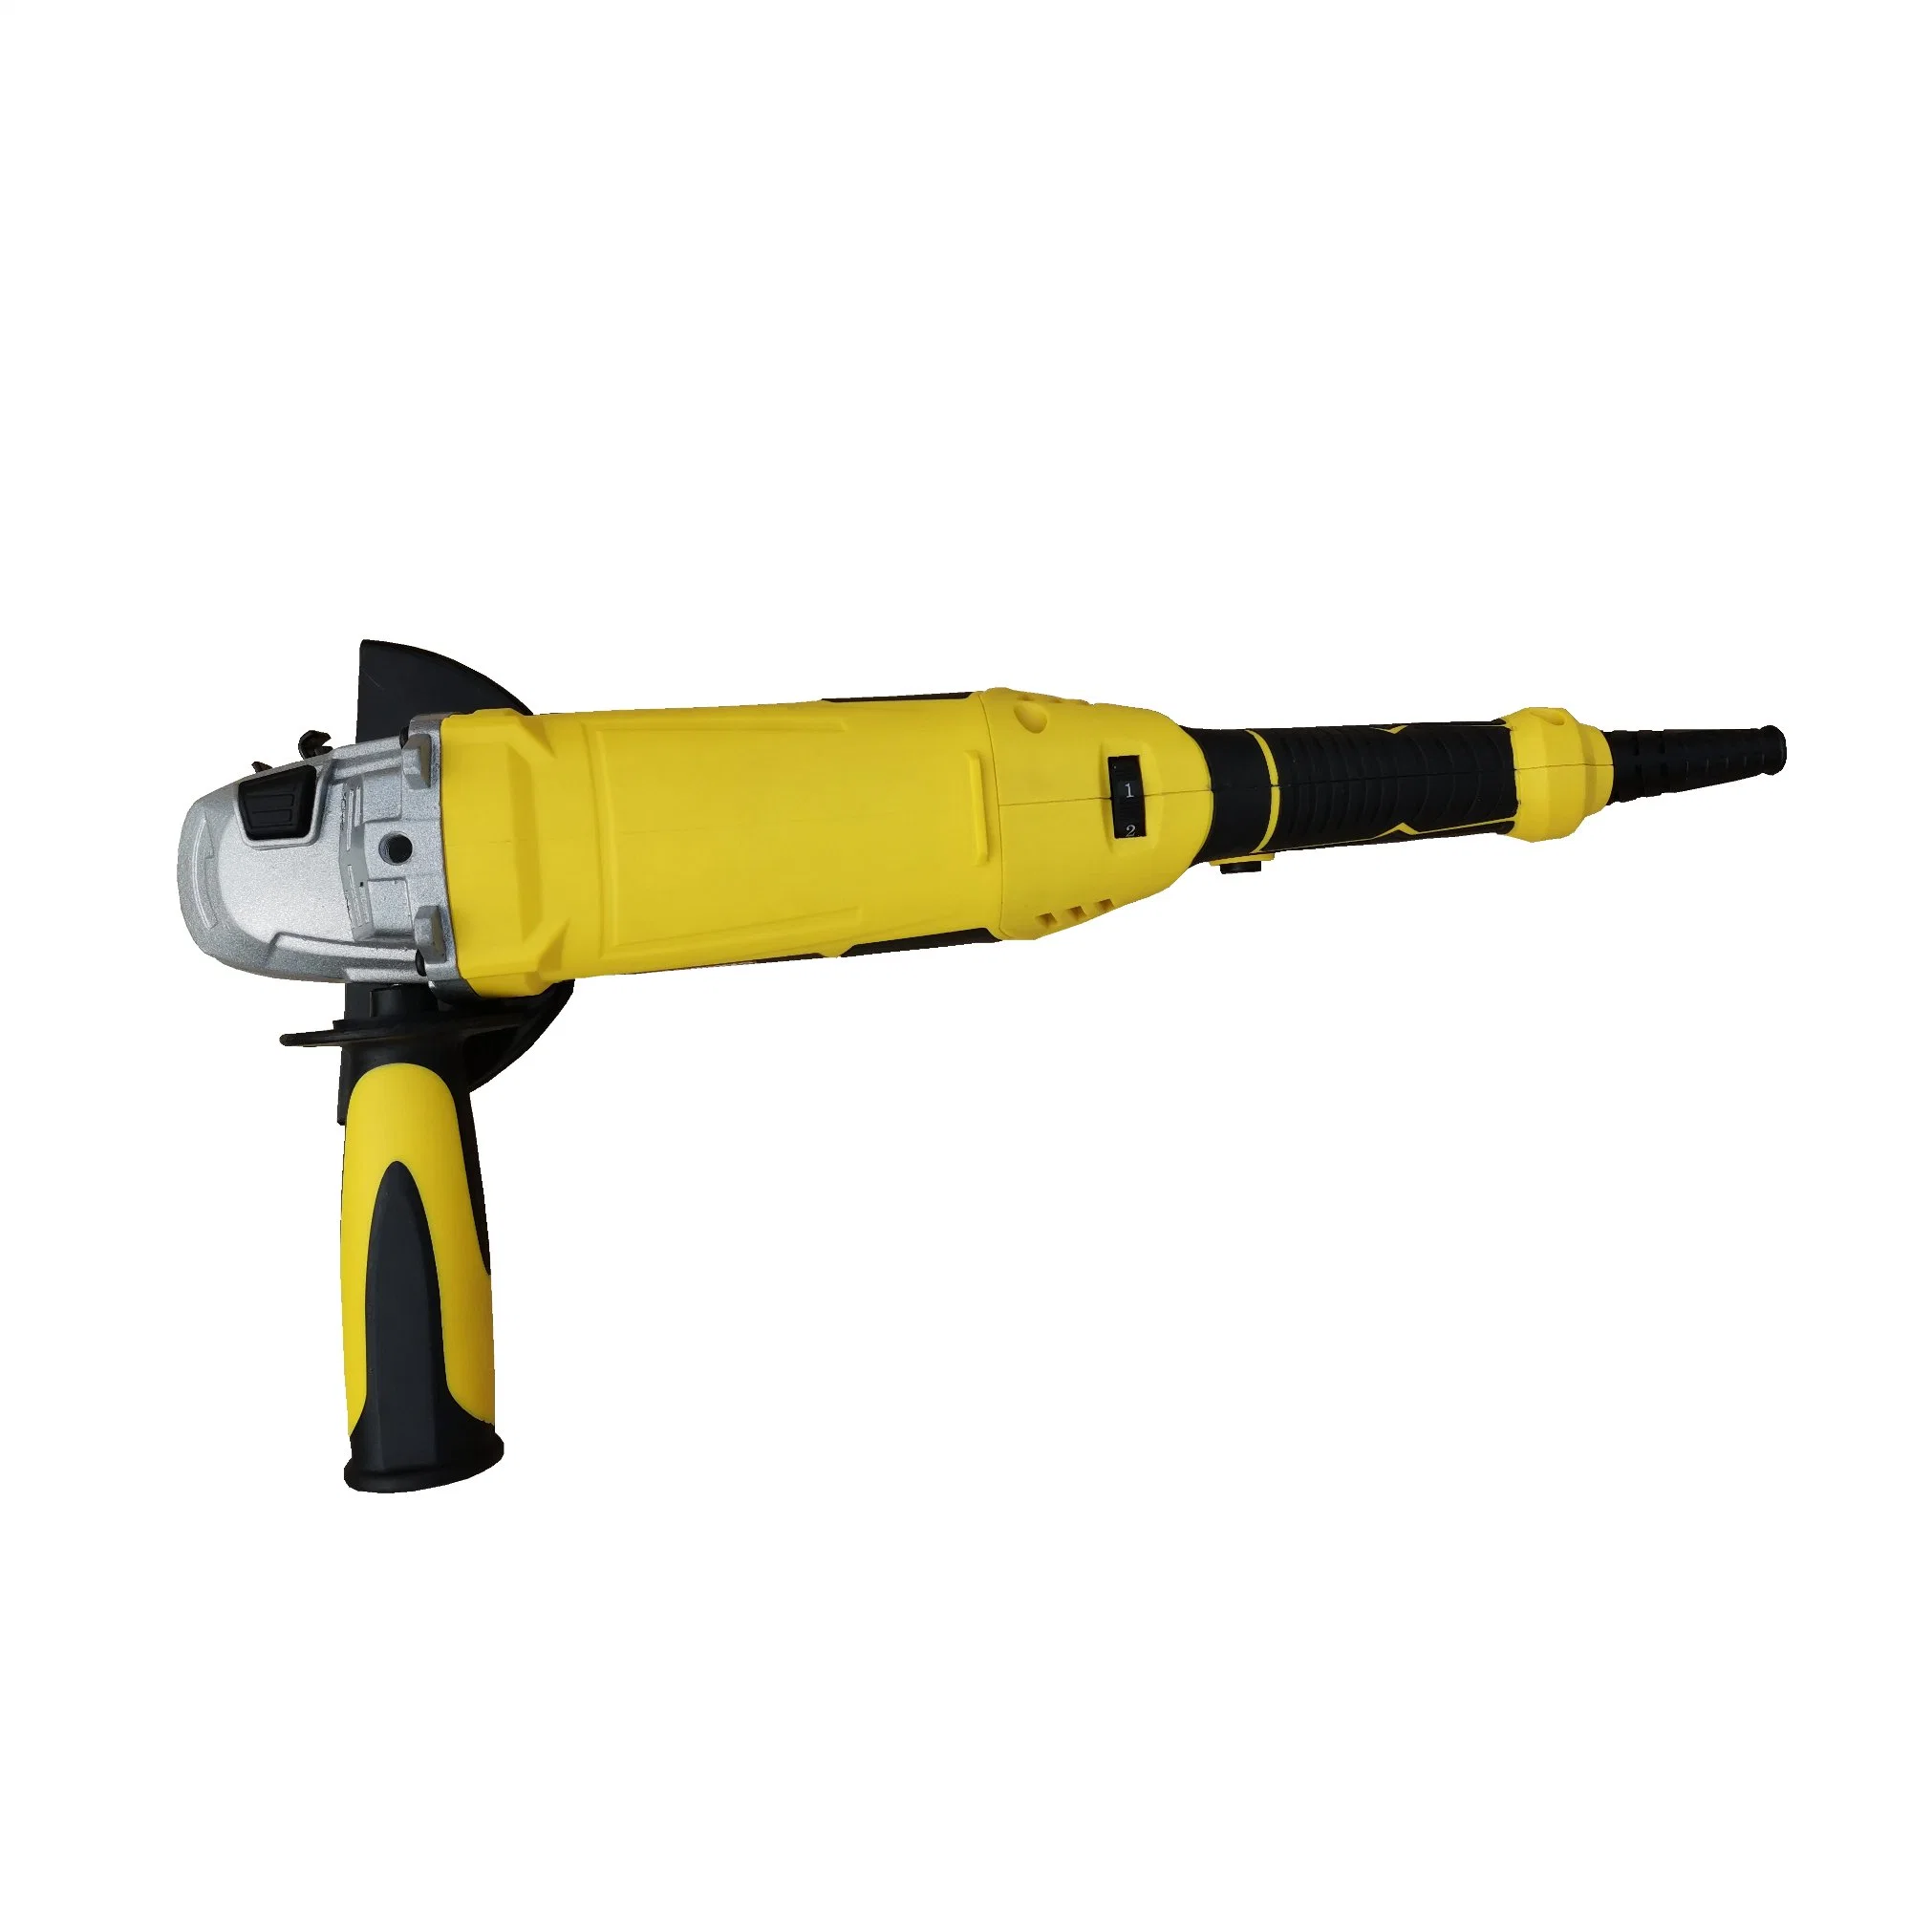 Power Tools Manufacturer Supplied Big Power Electric Hand Tool